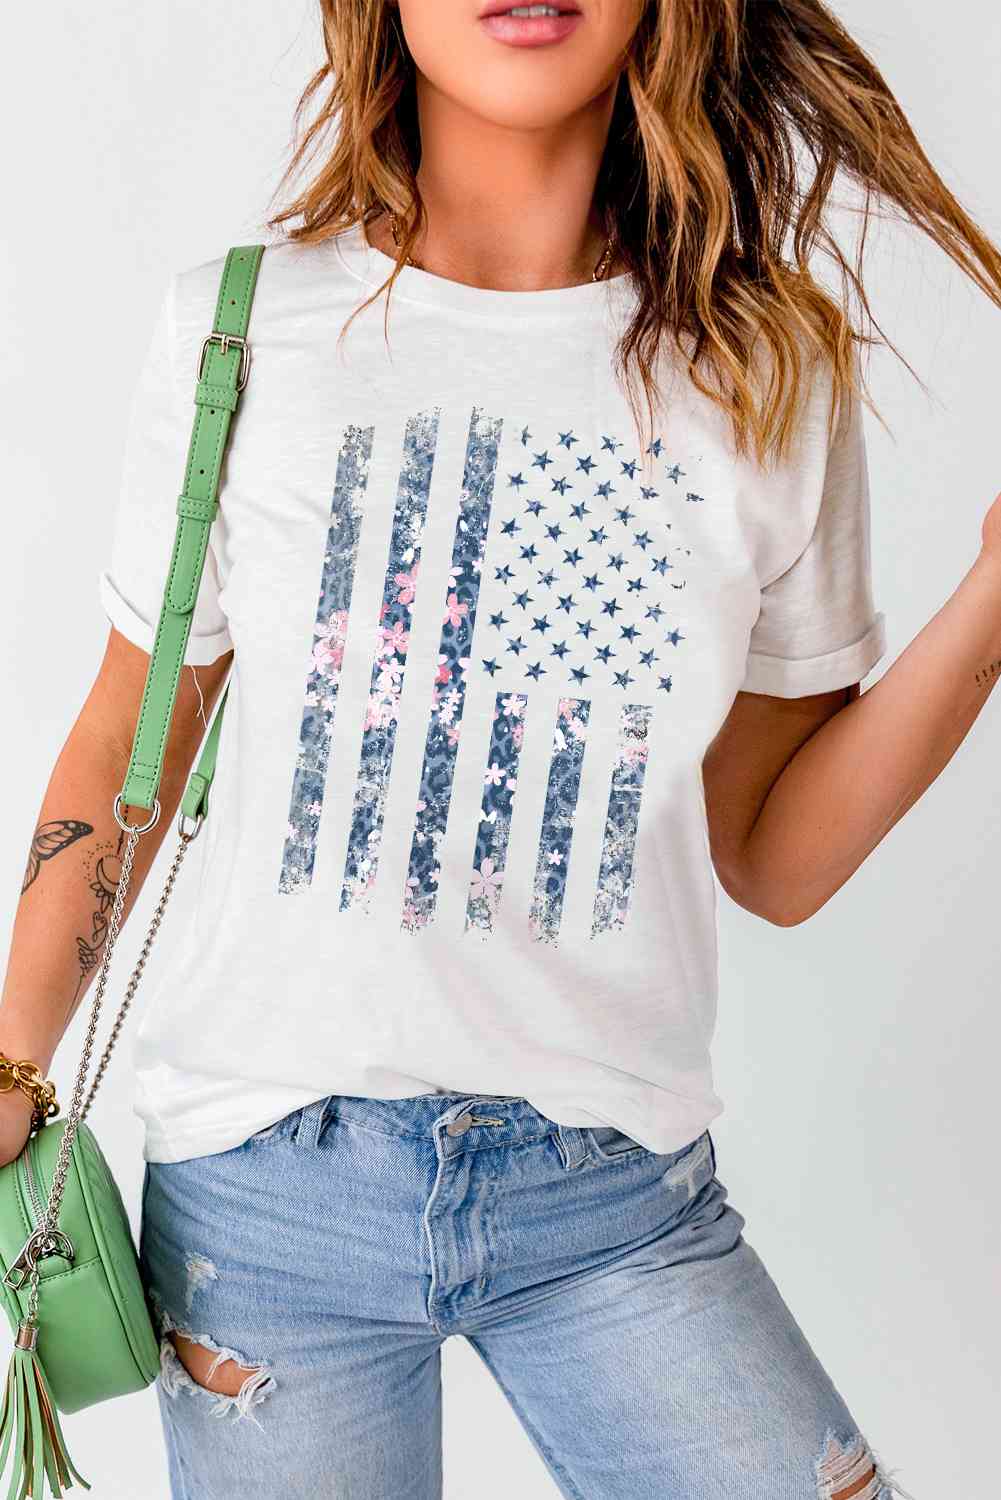 Stars and Stripes Graphic Tee Print on any thing USA/STOD clothes